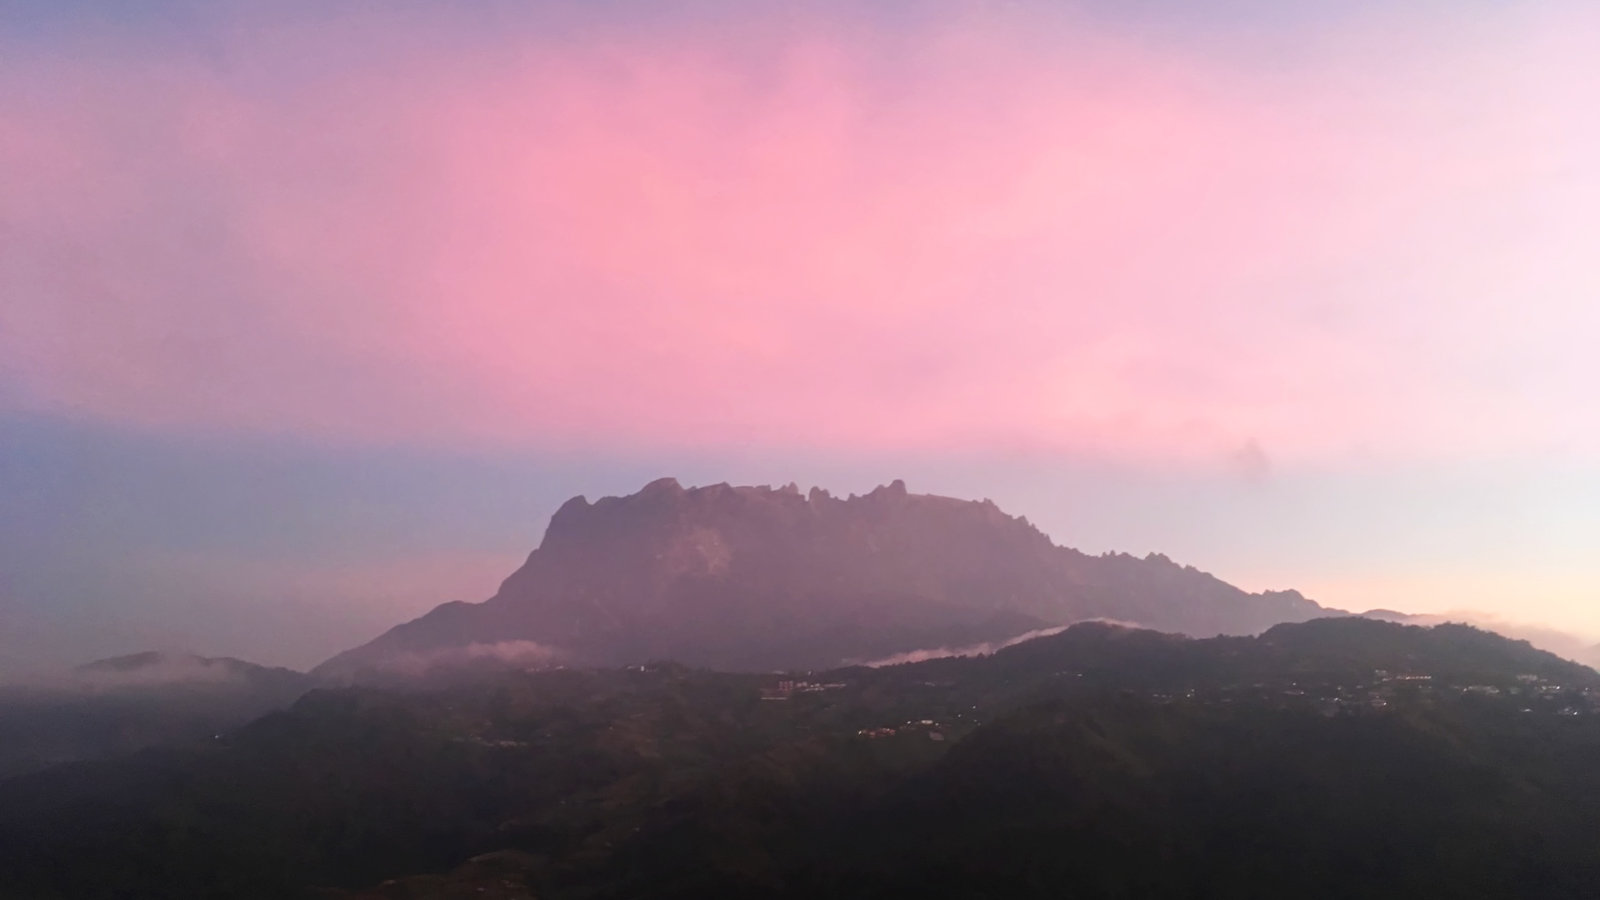 Mount Kinabalu is the highest mountain in Malaysia and sacred to local tribes